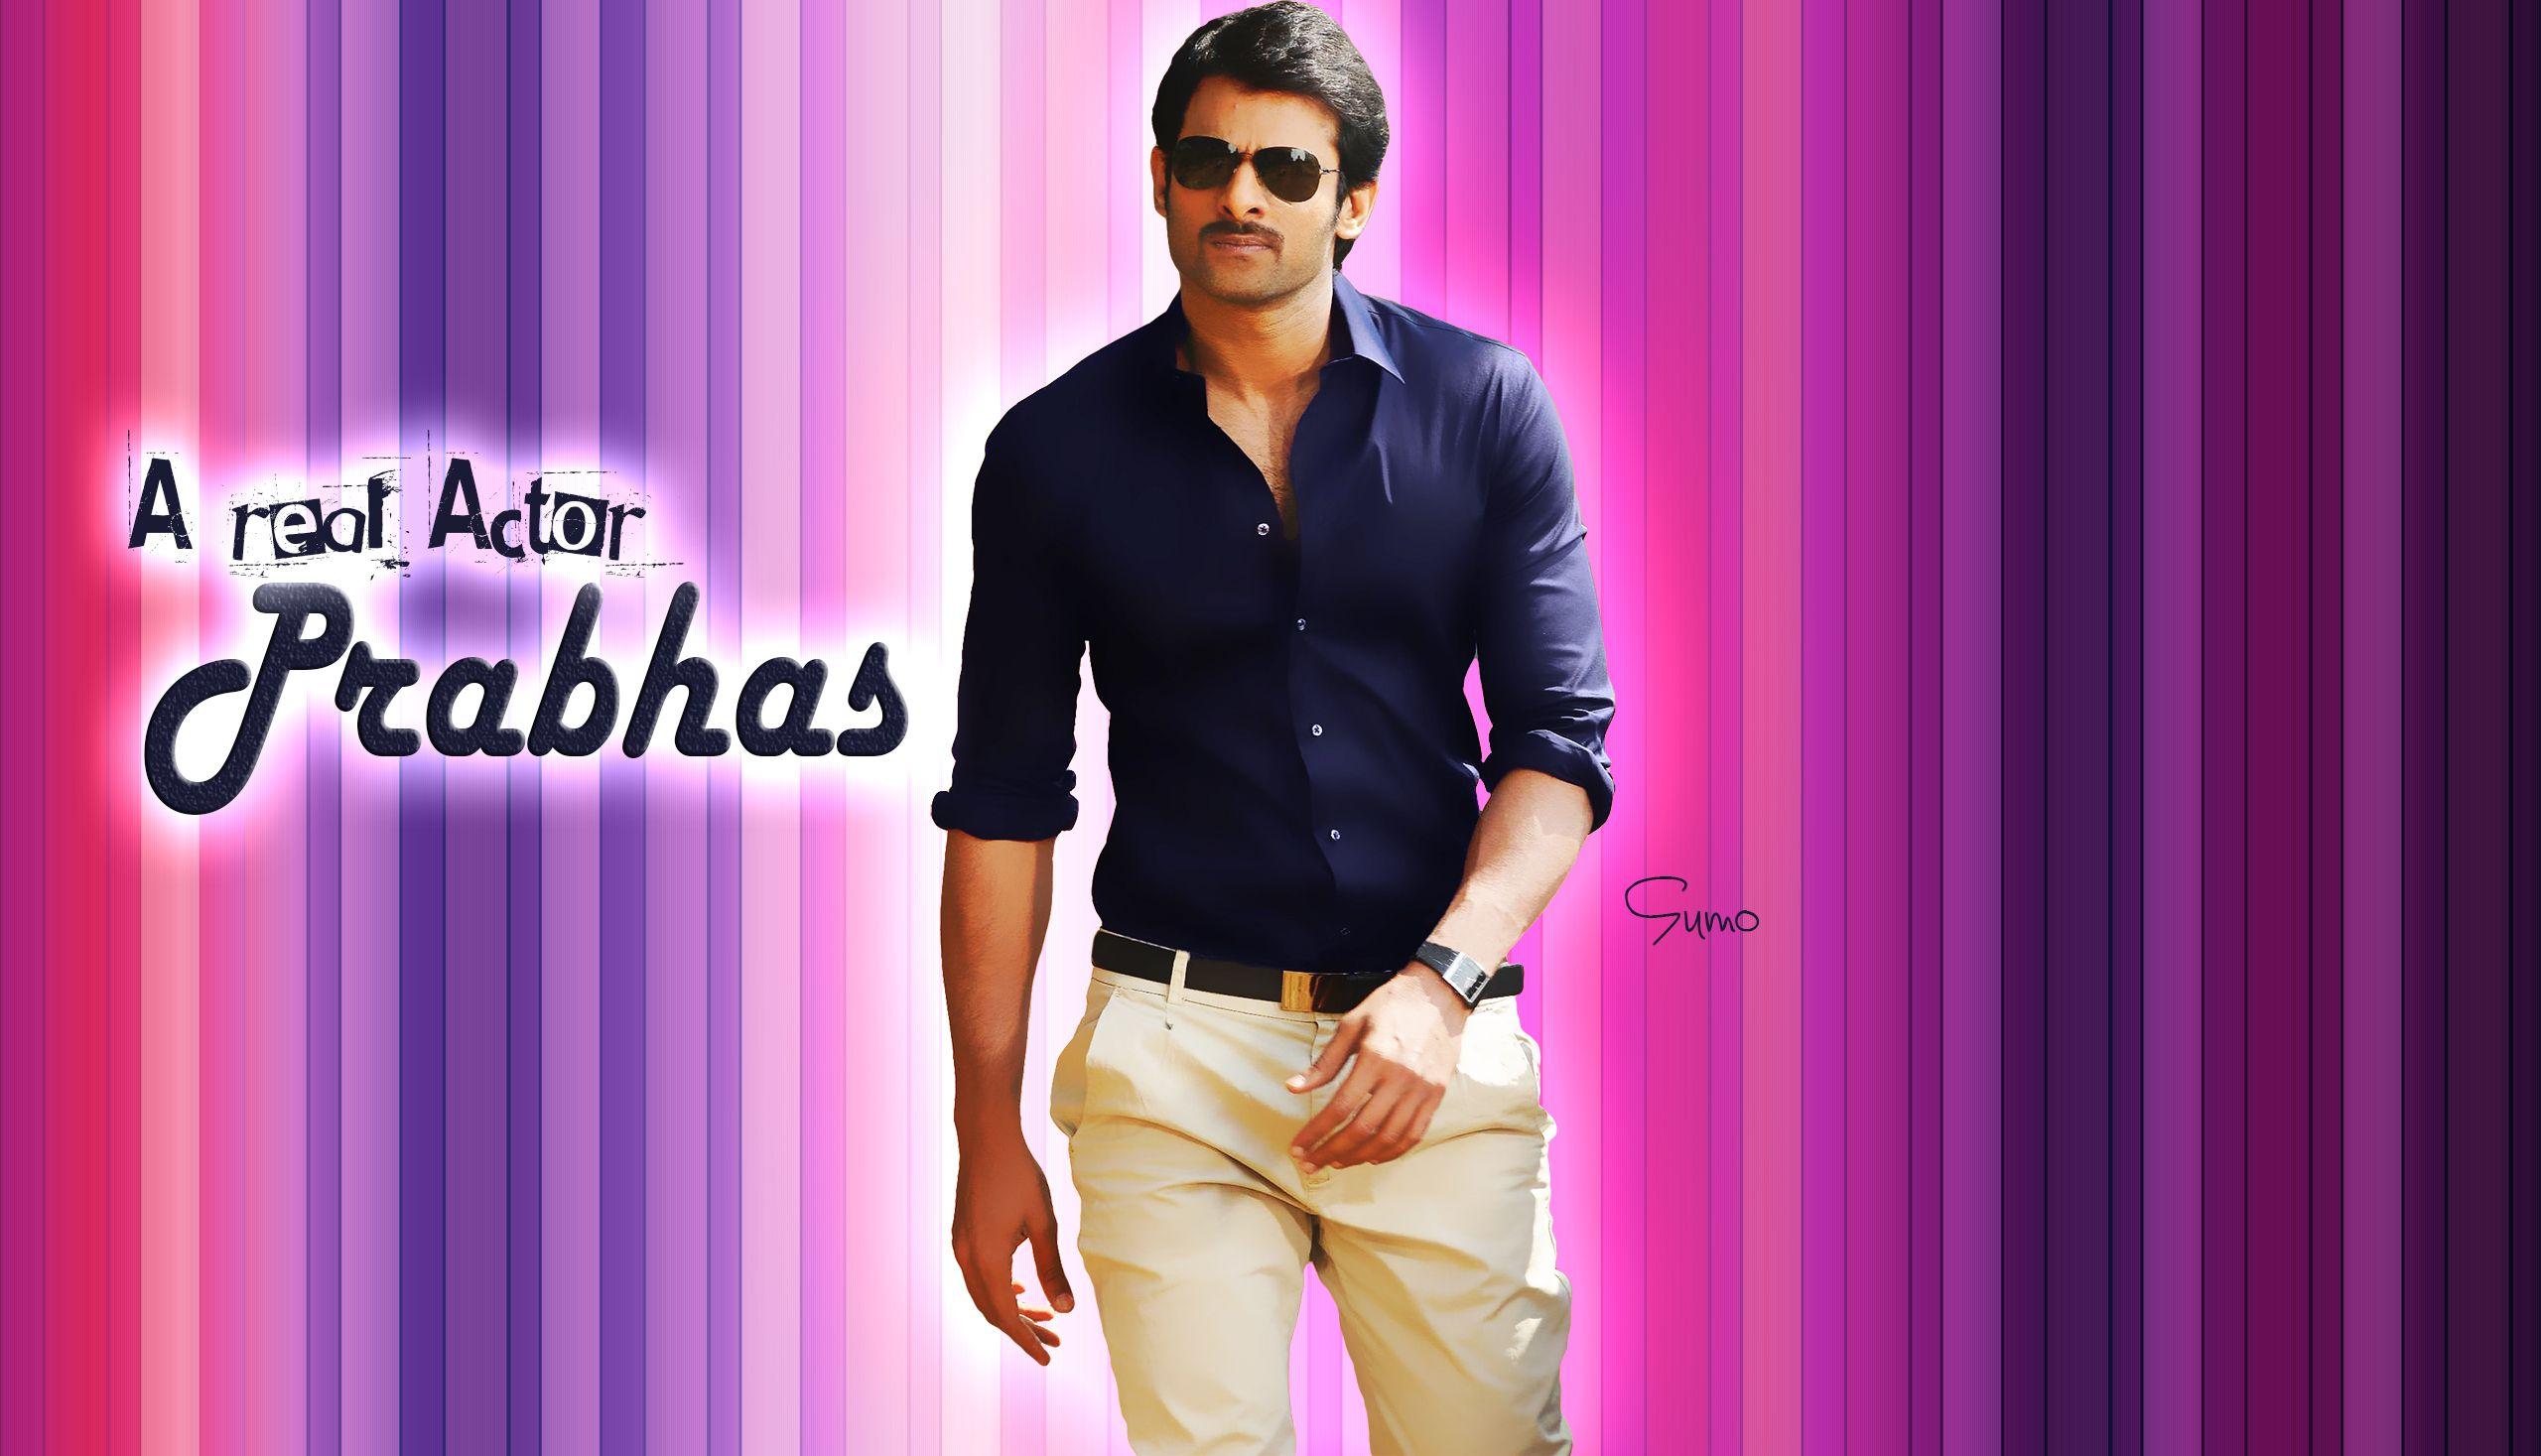 Prabhas Wallpaper High Resolution and Quality Download